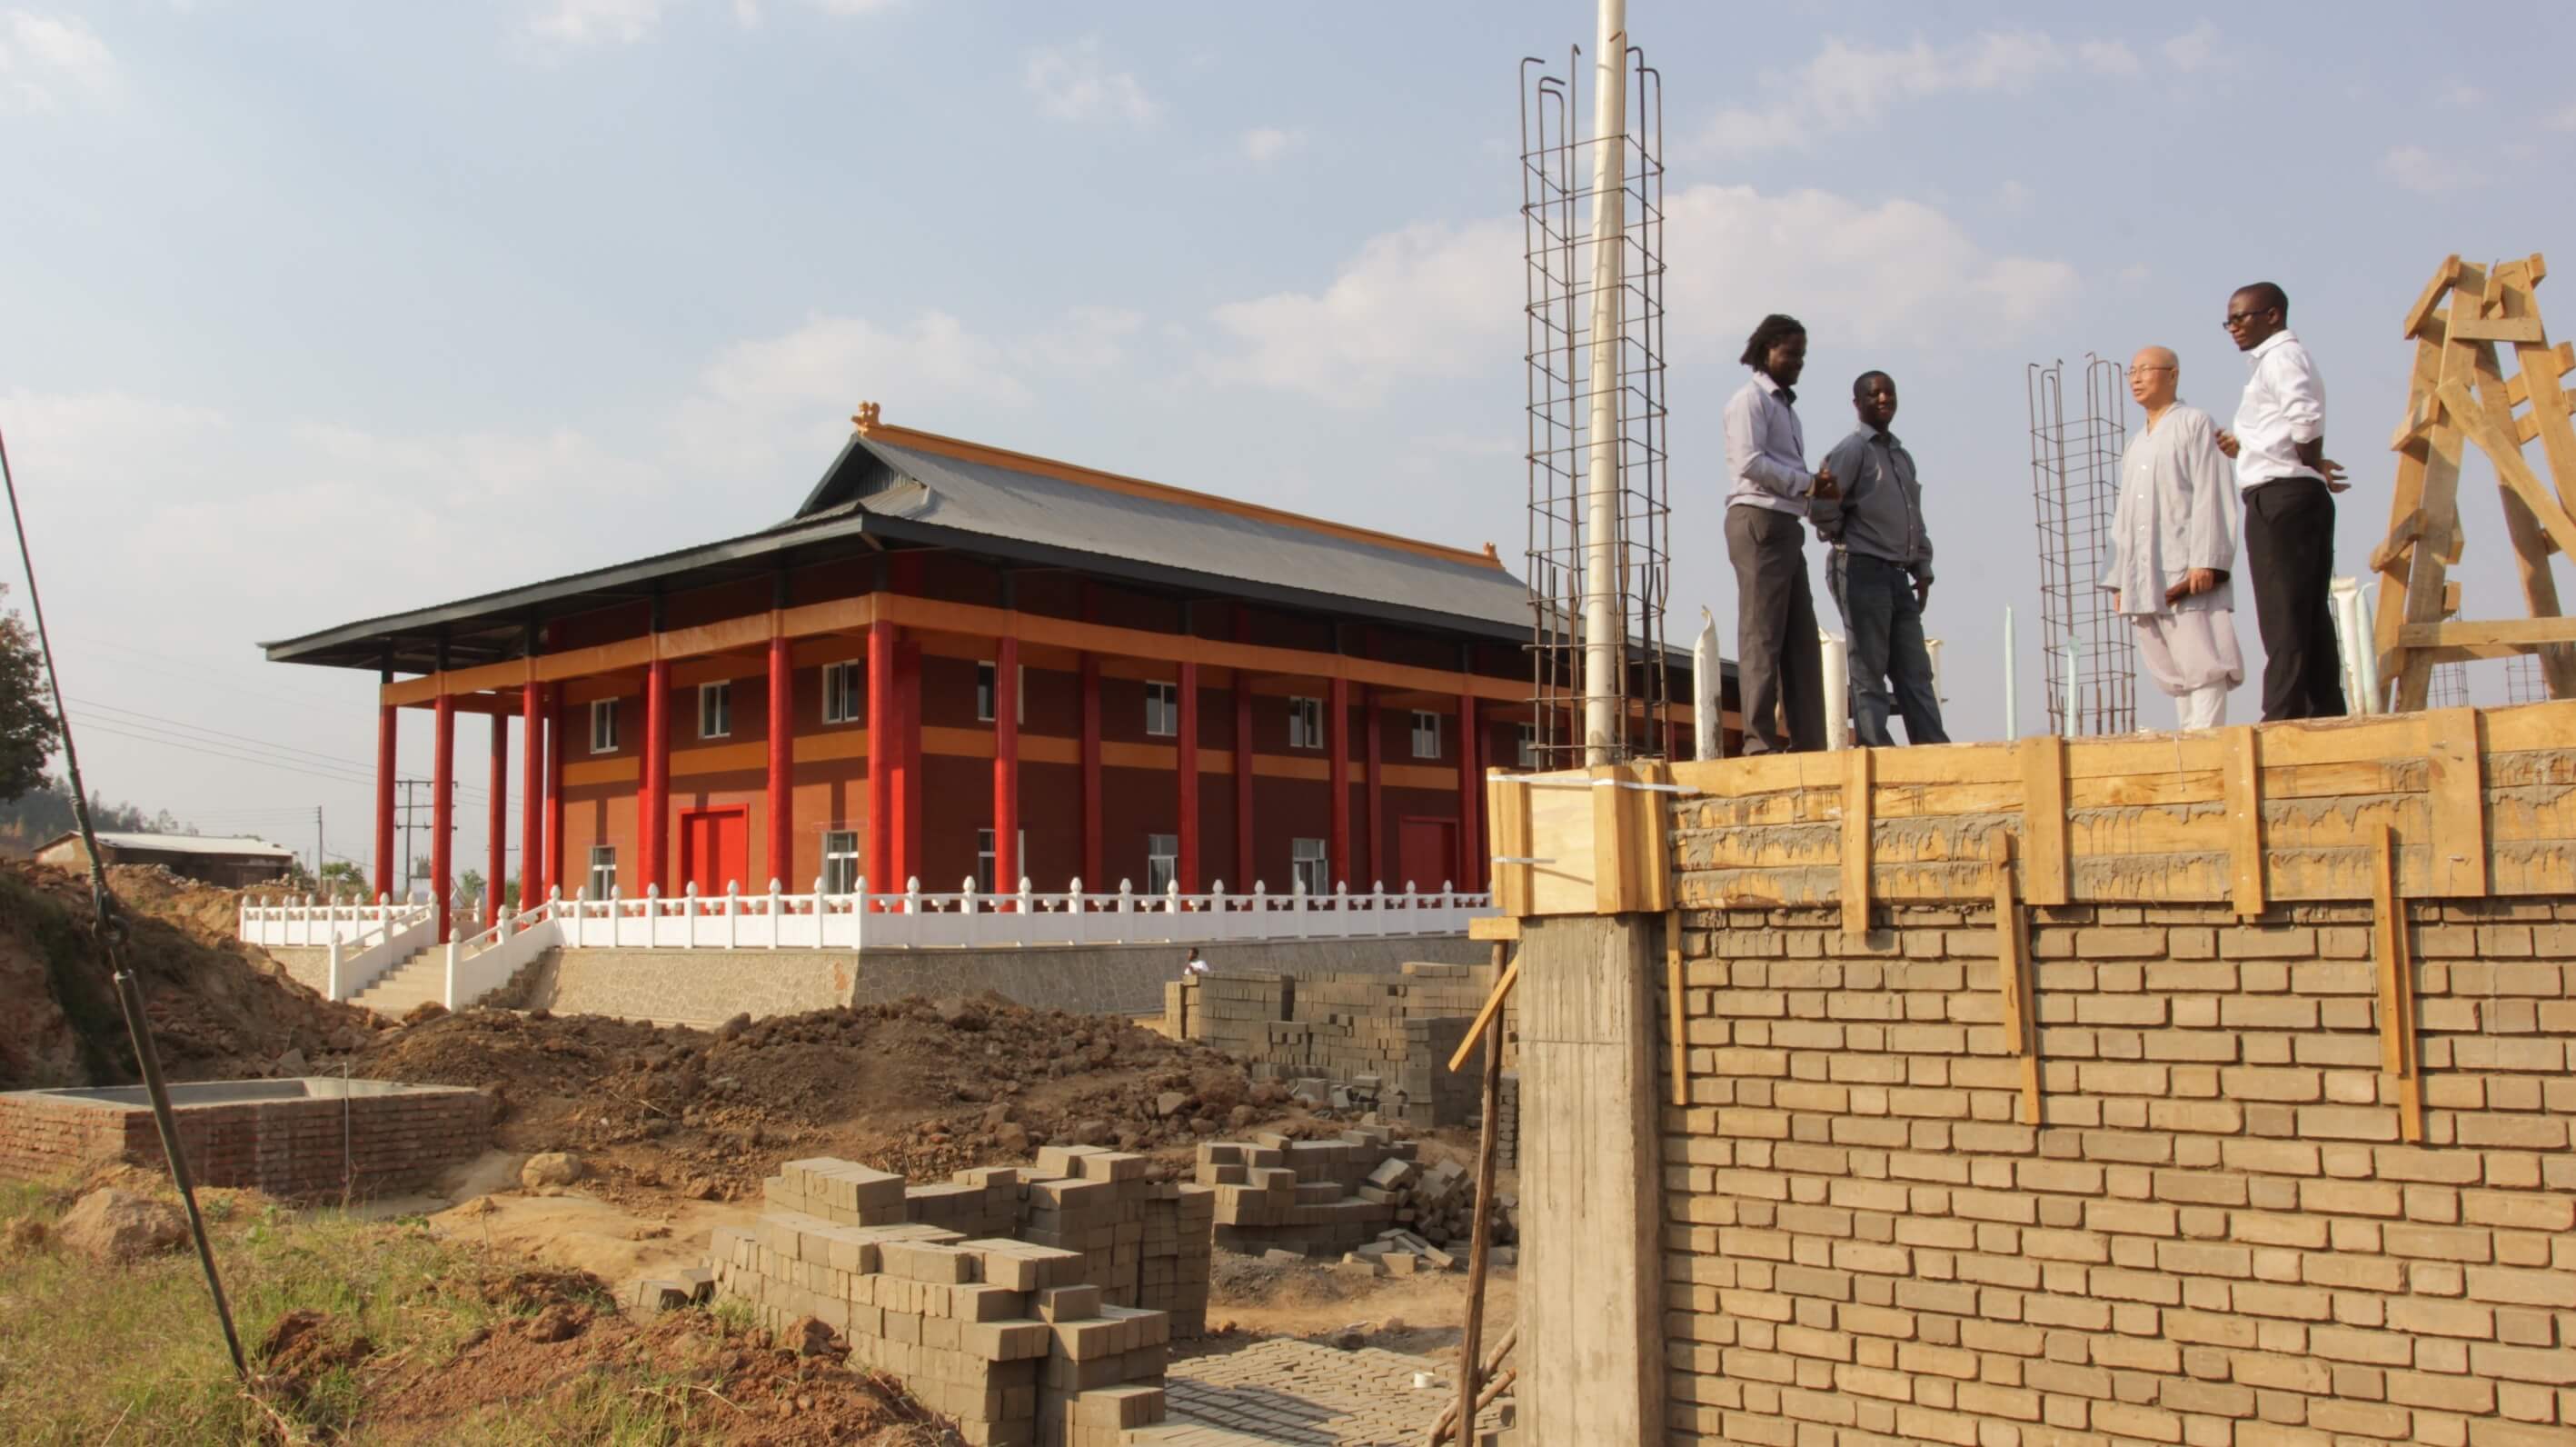 Two men are standing on the top of a construction building. In the background there are is a red Buddhist temple.